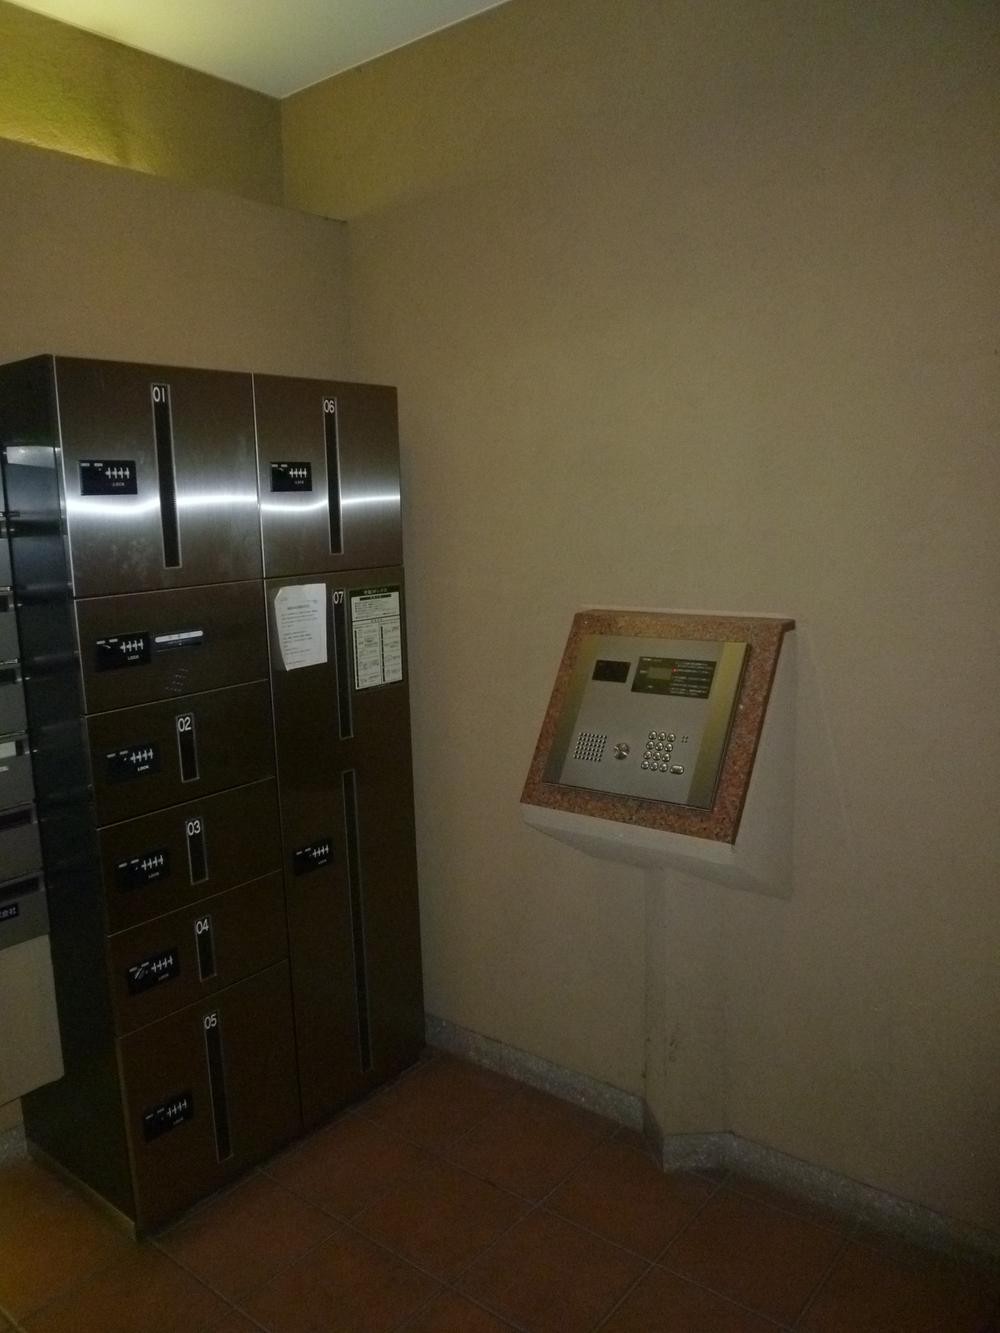 Other common areas. Convenient home delivery locker